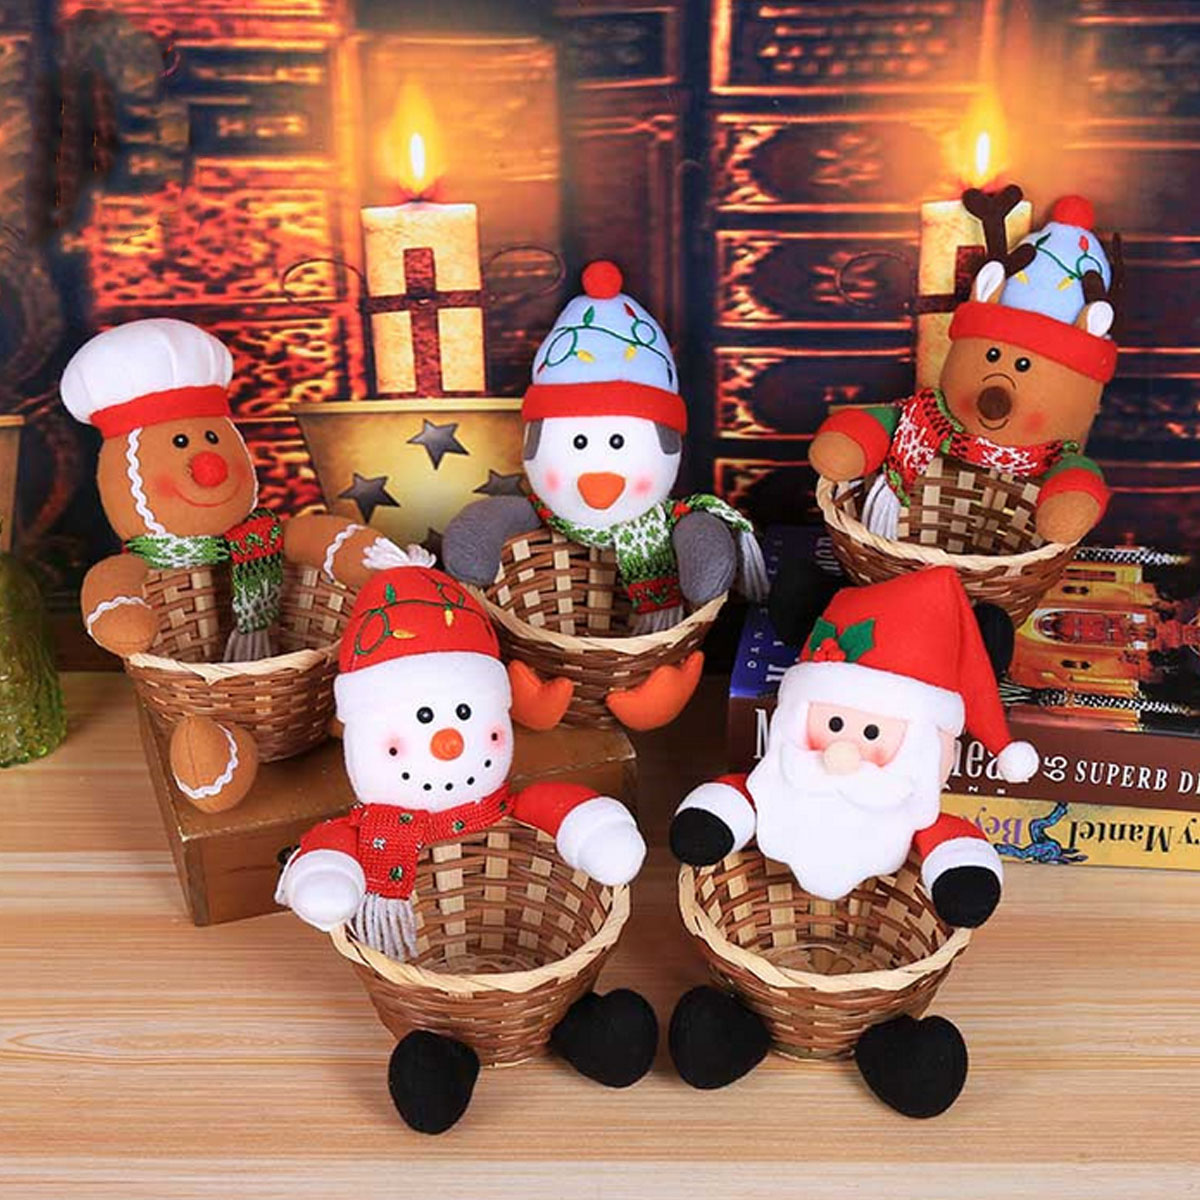 5-Types-Christmas-Candy-Storage-Basket-Santa-Claus-Home-Decorations-Ornaments-1477556-2